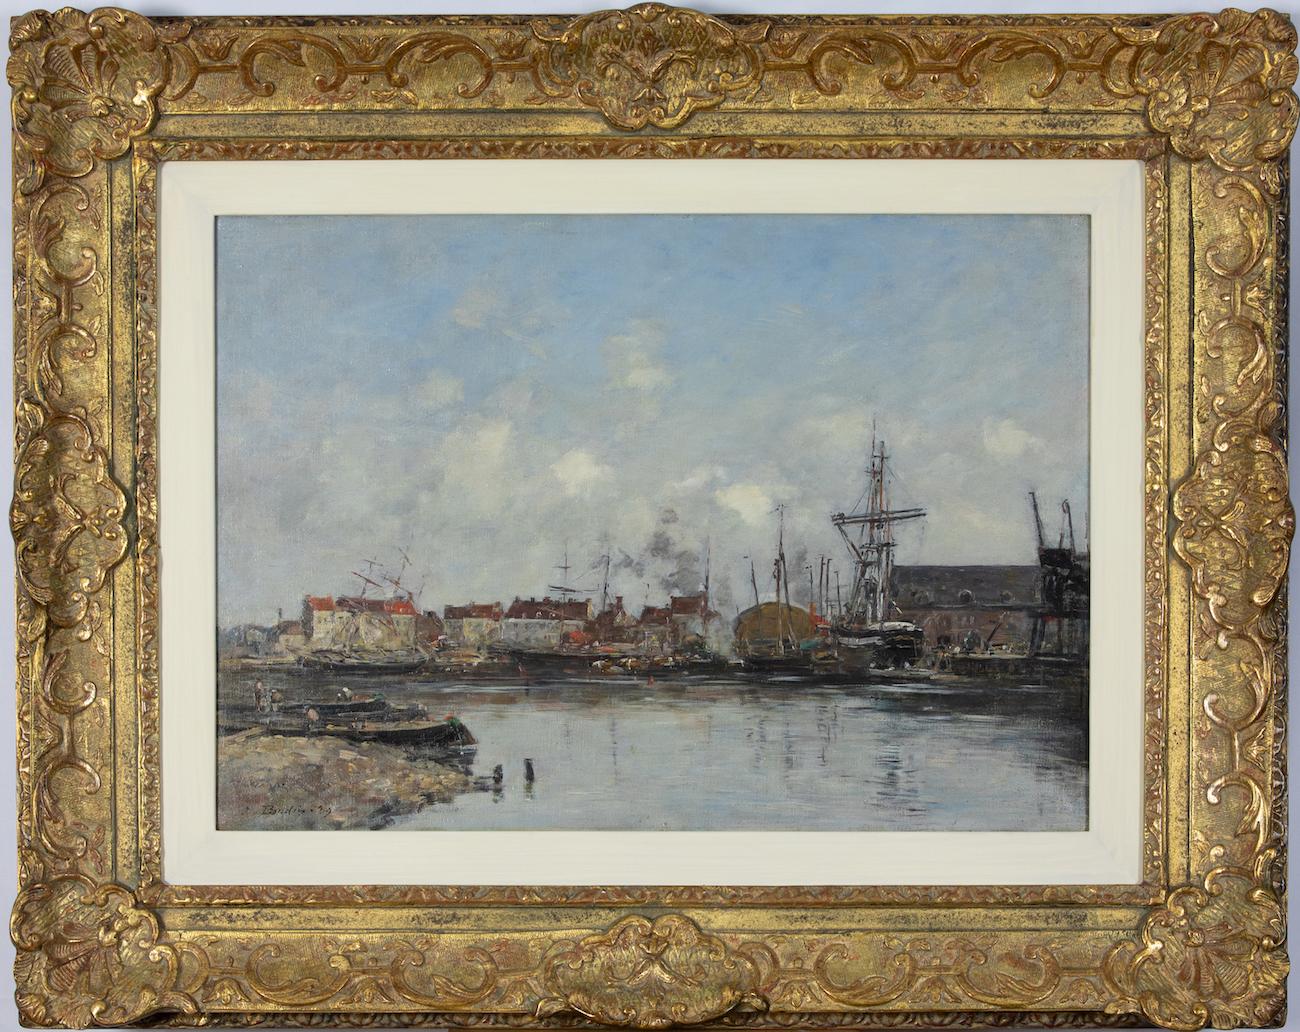 Dunkerque, le vieux bassin by Eugène Boudin - Figurative water scene  - Painting by Eugène Louis Boudin